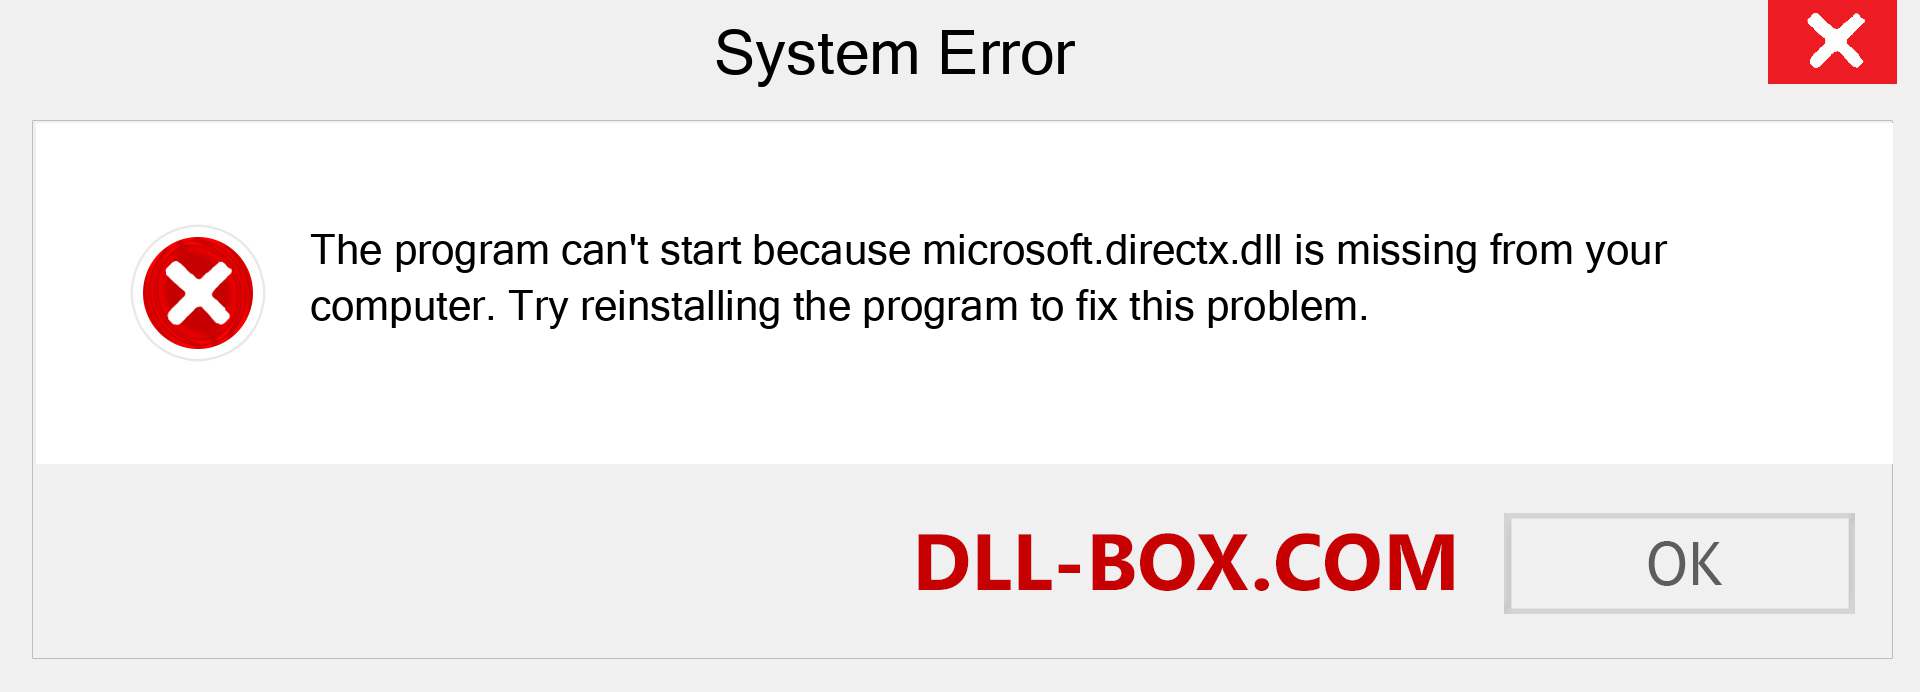  microsoft.directx.dll file is missing?. Download for Windows 7, 8, 10 - Fix  microsoft.directx dll Missing Error on Windows, photos, images